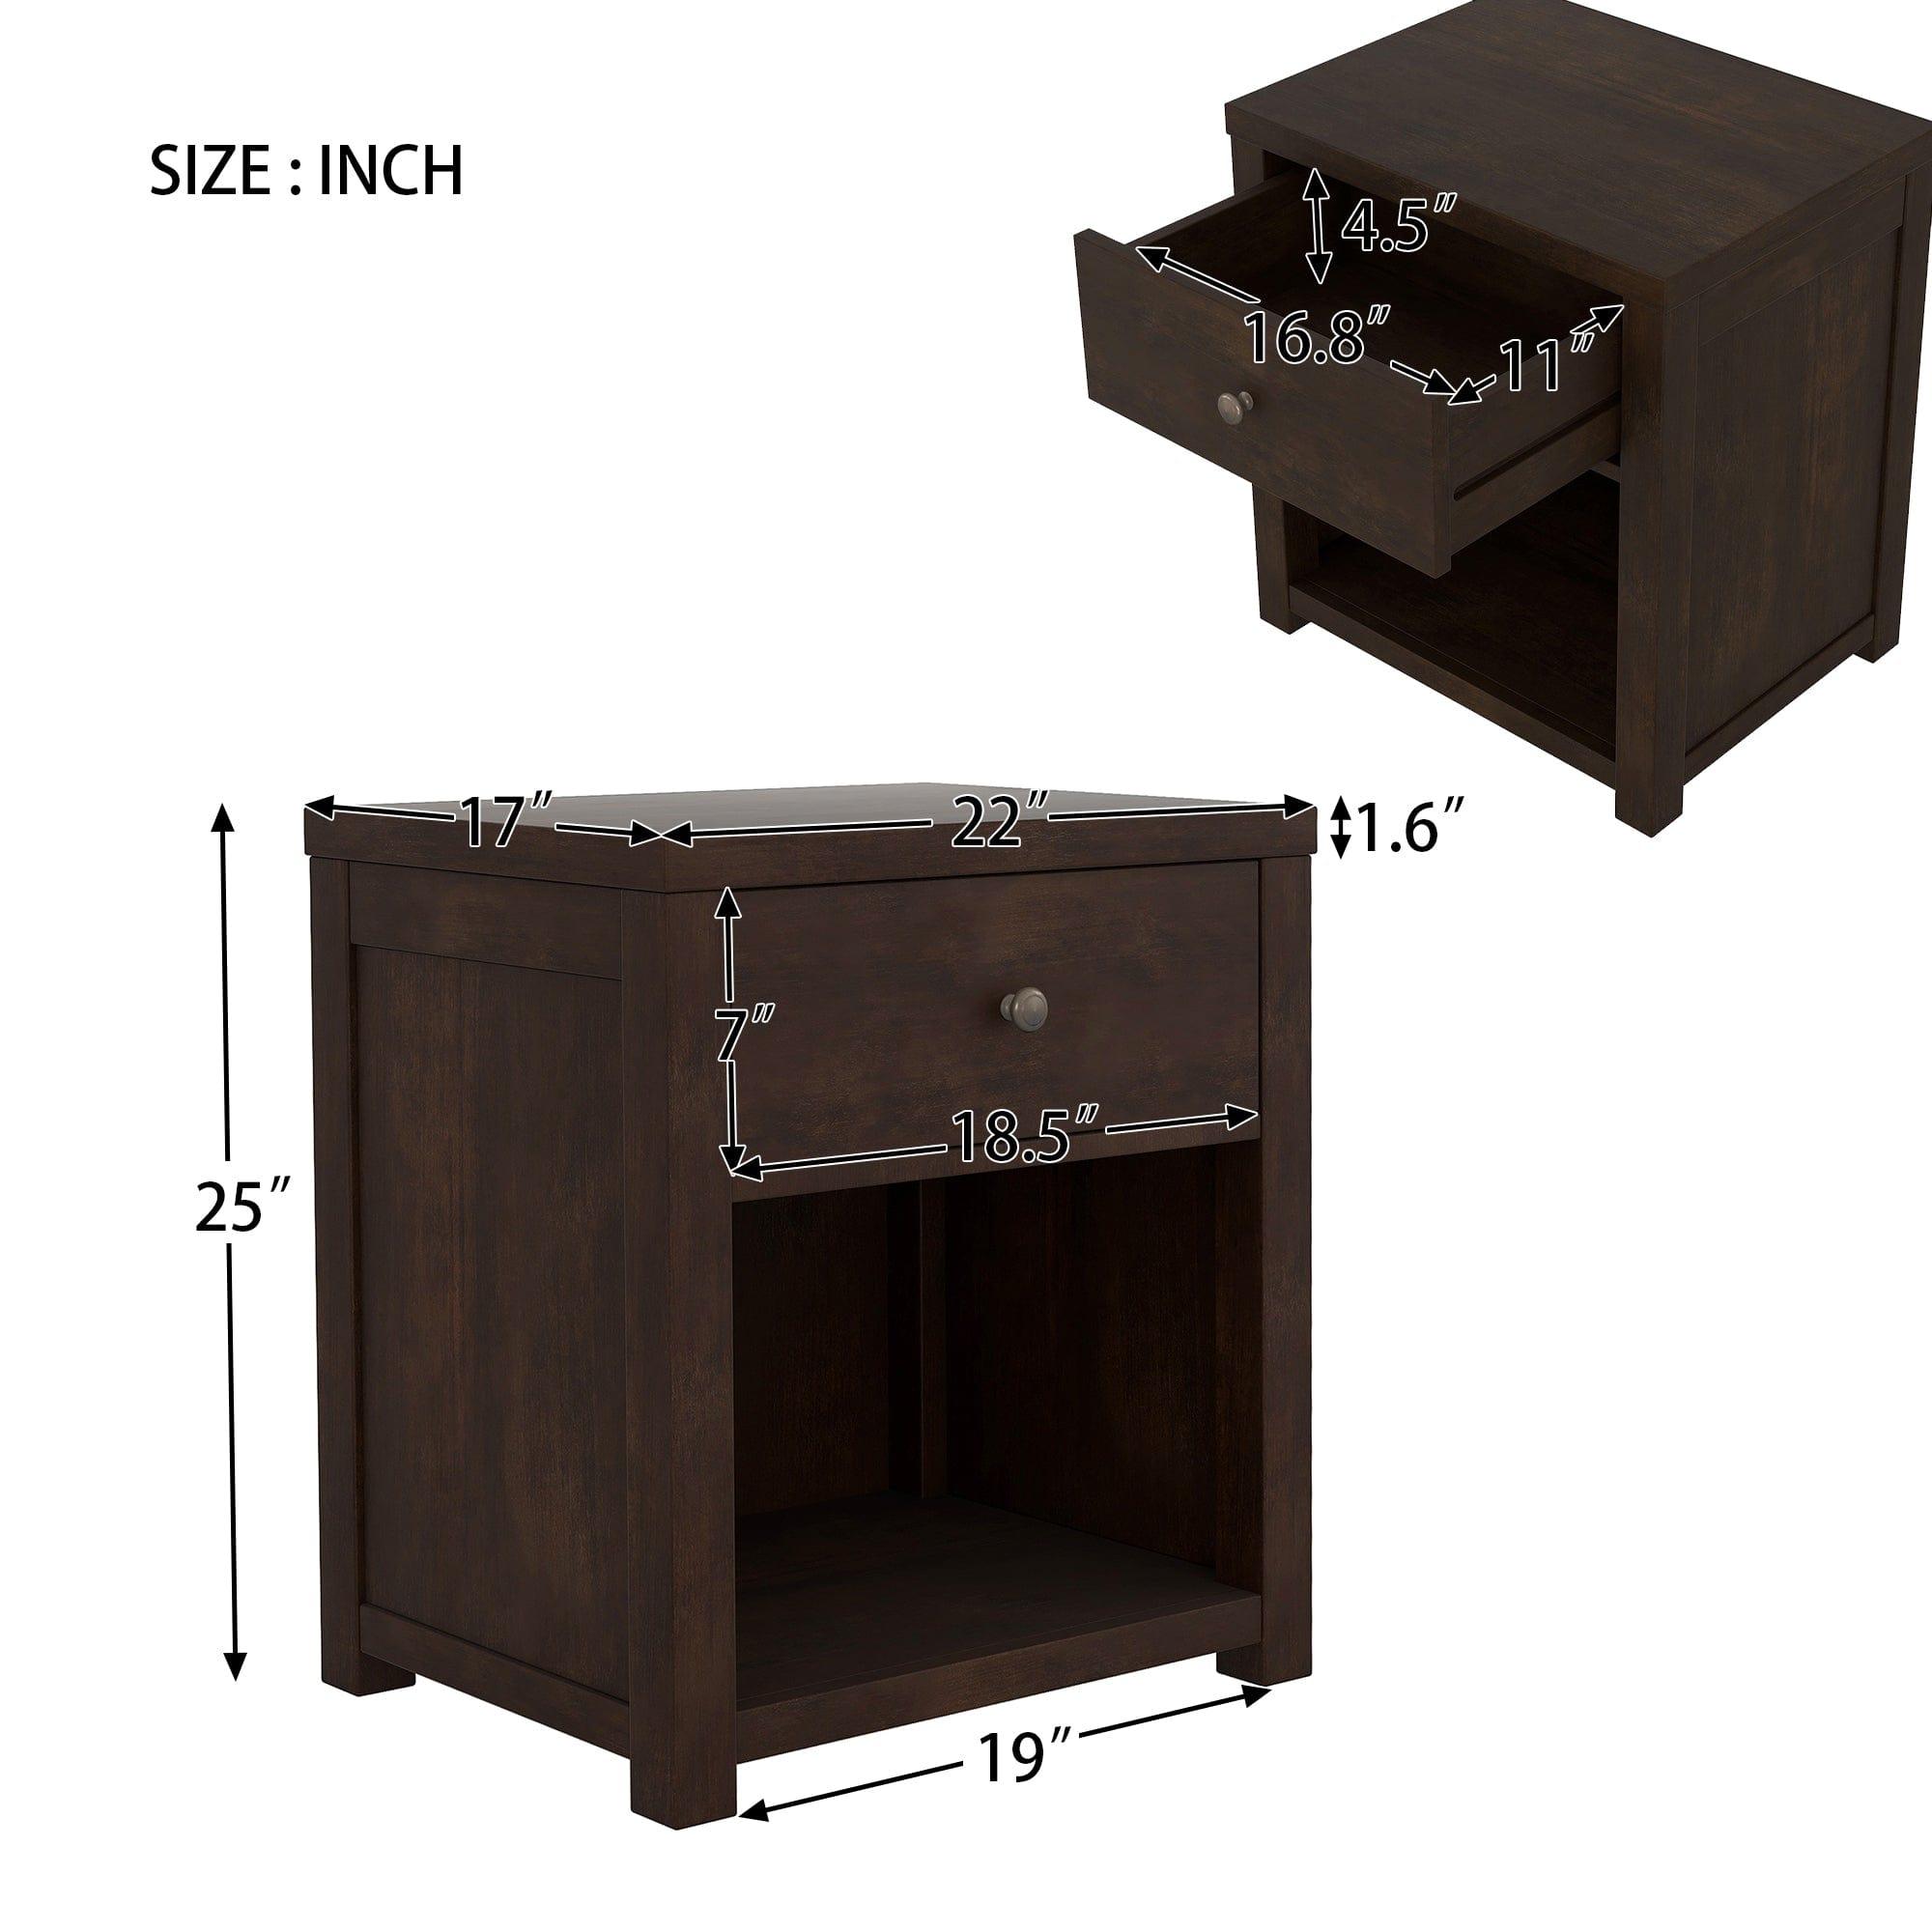 Shop Vintage Aesthetic 1 Drawer Solid Wood Nightstand Sofa End Table in Rich Brown (Nightstand of Freely Configurable Bedroom Sets) Mademoiselle Home Decor